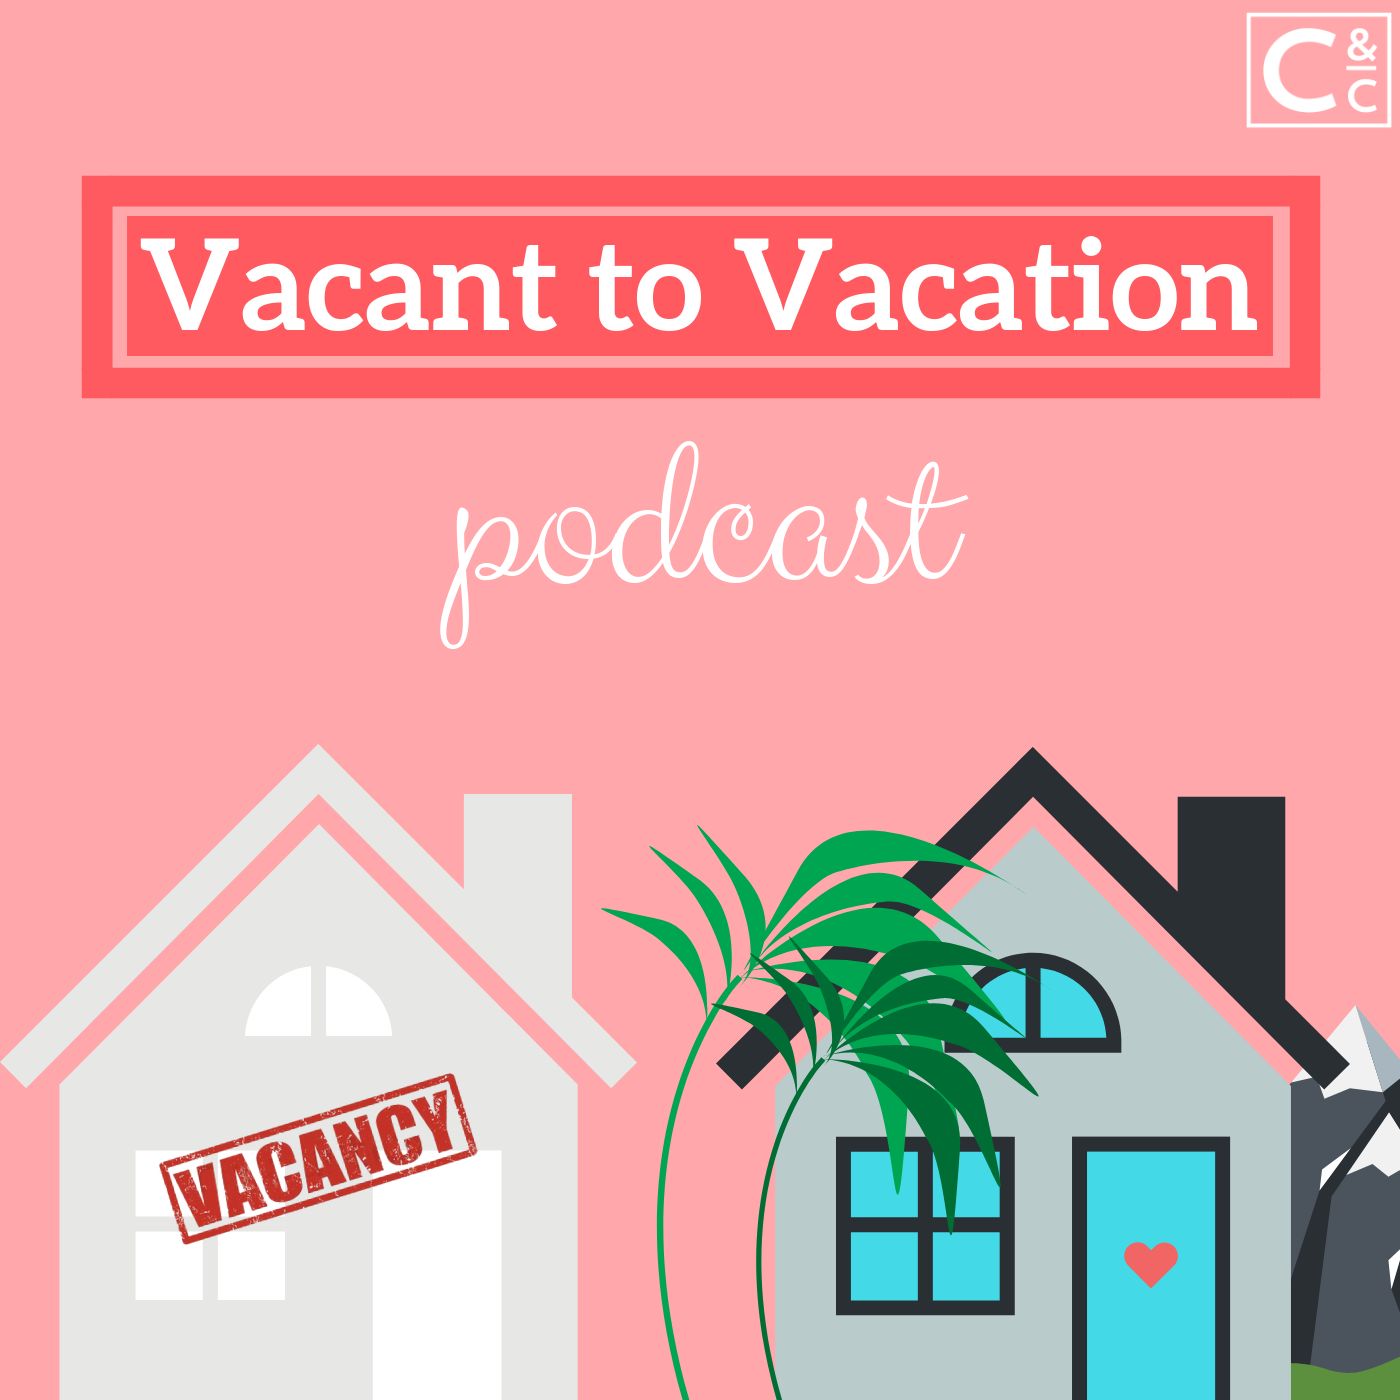 Vacant to Vacation